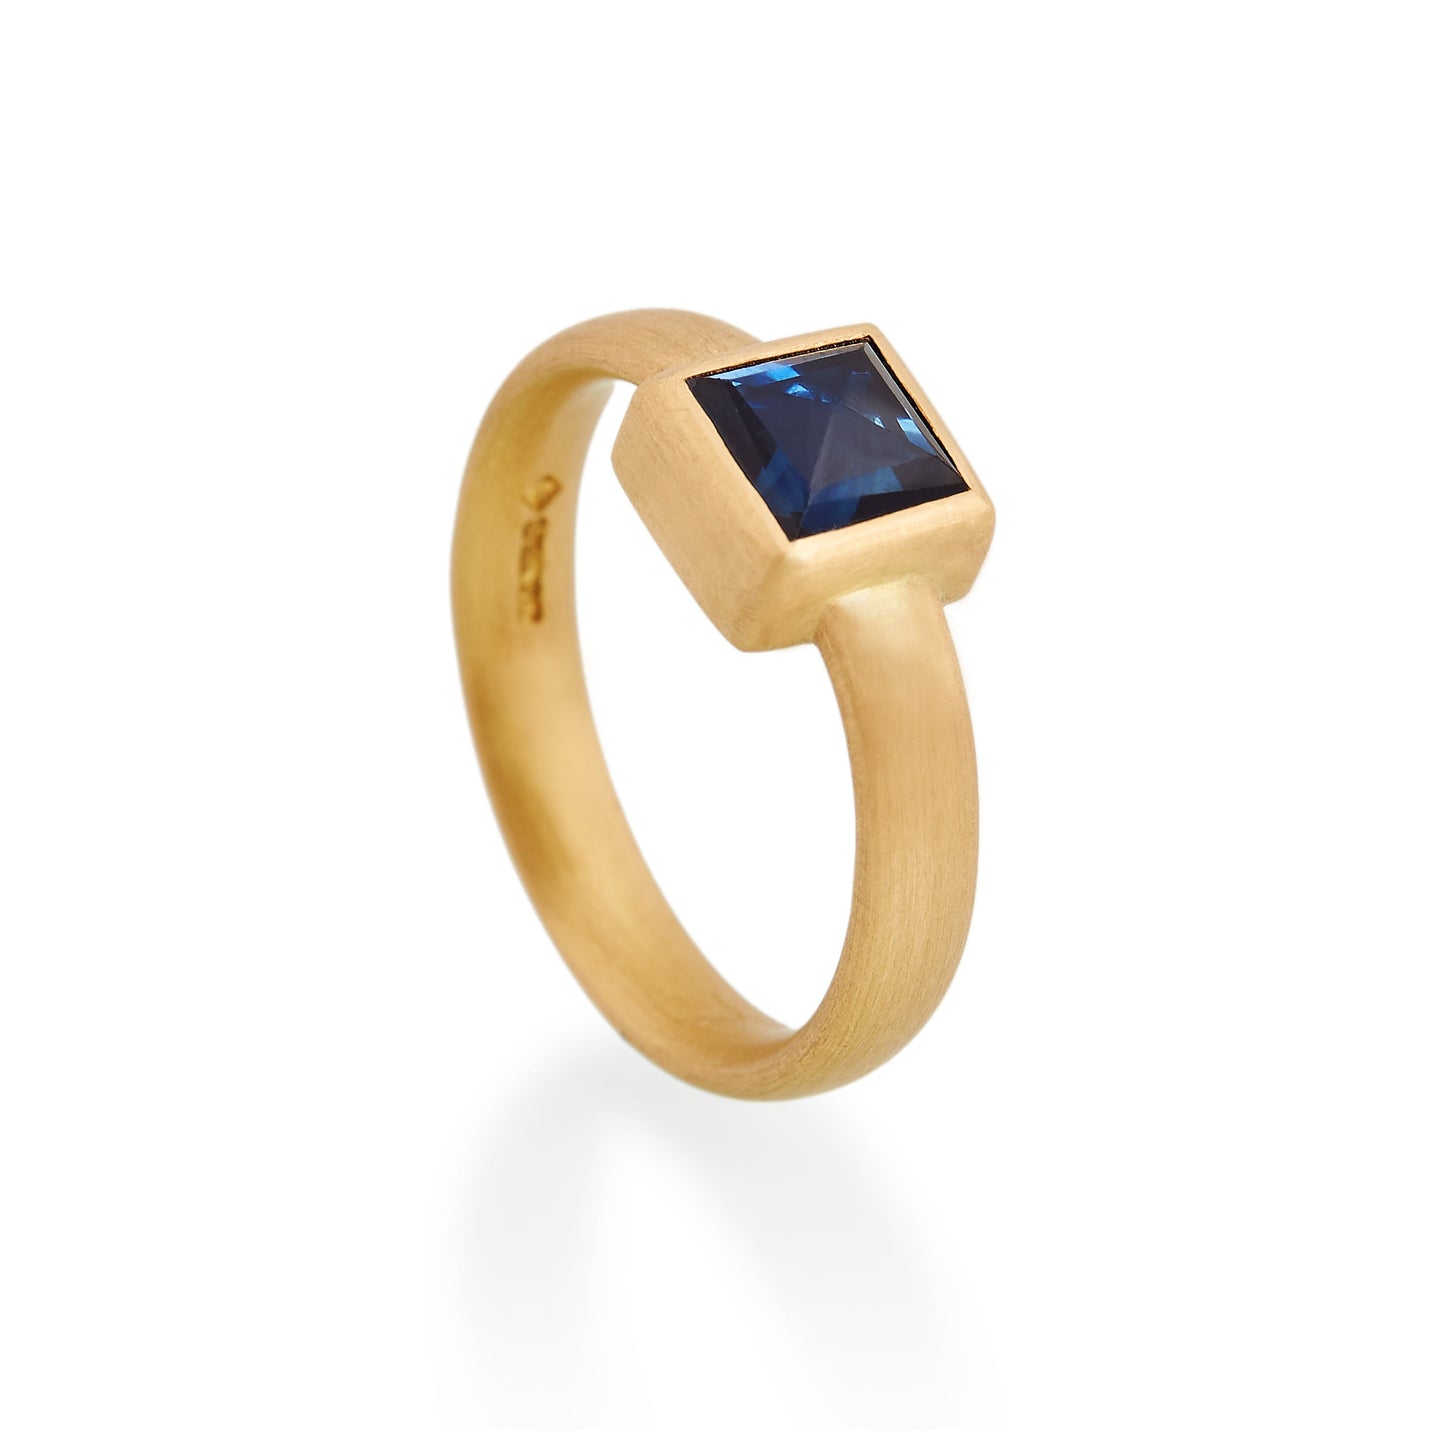 Square Sapphire Ring, 22ct Gold